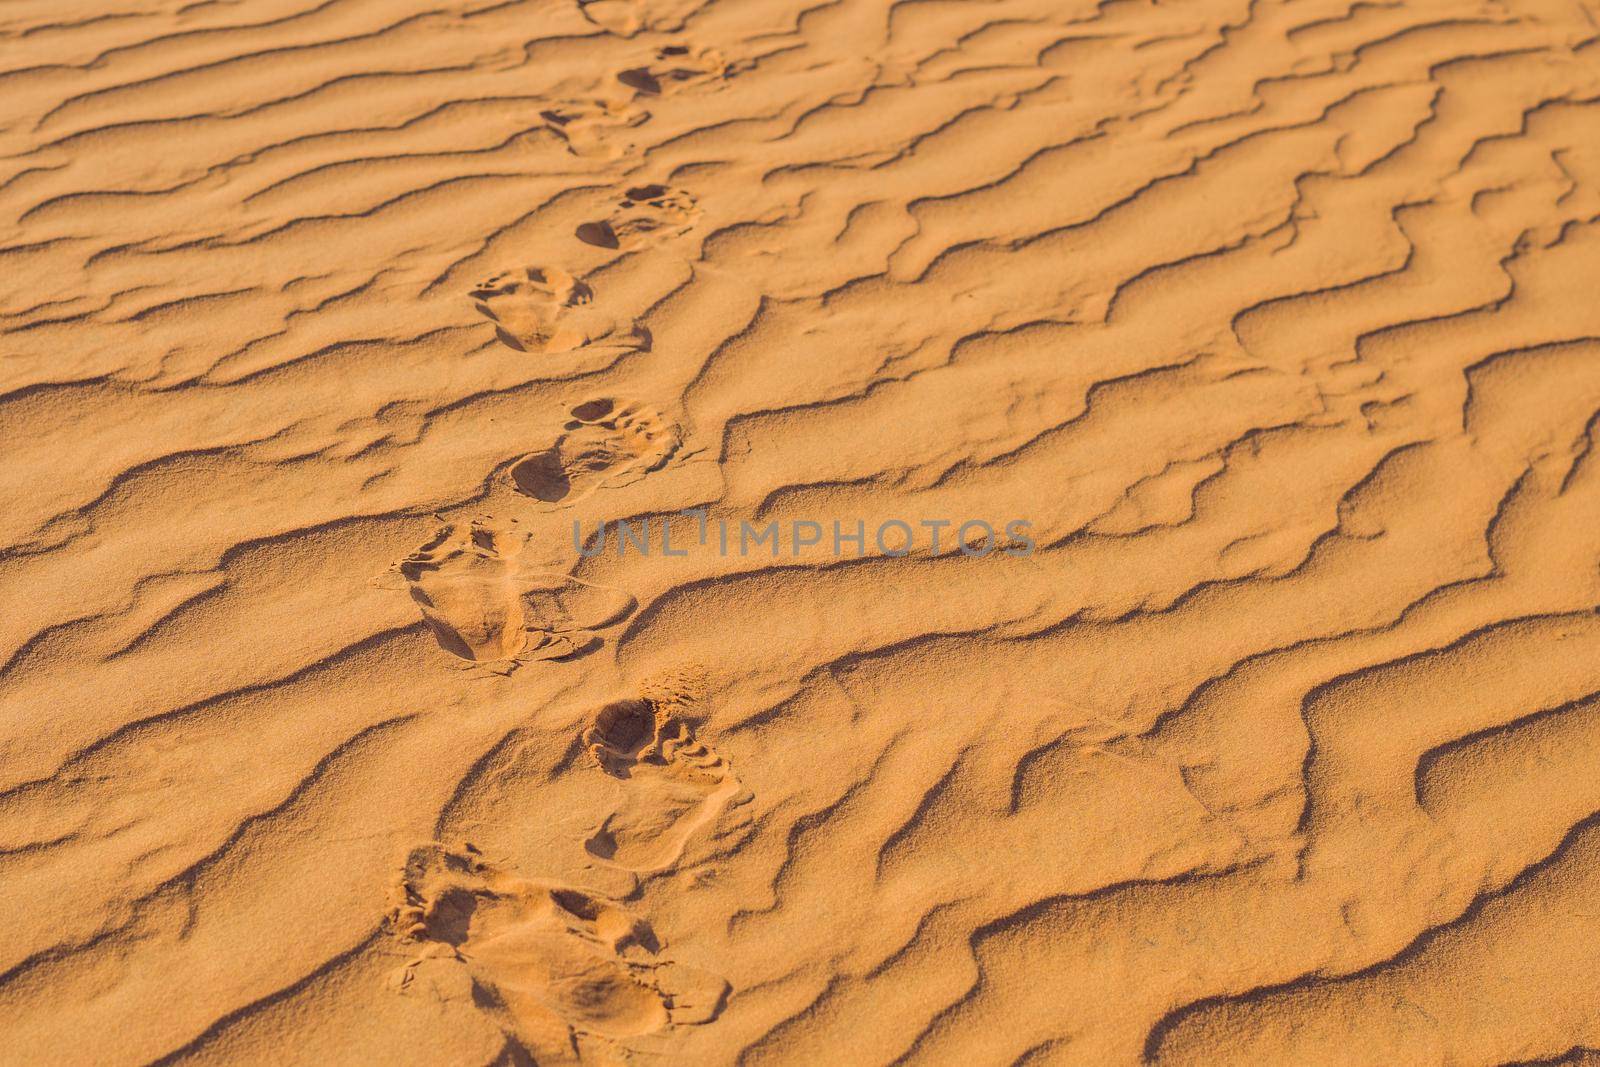 Footprints in the sand in the red desert at Sunrise by galitskaya